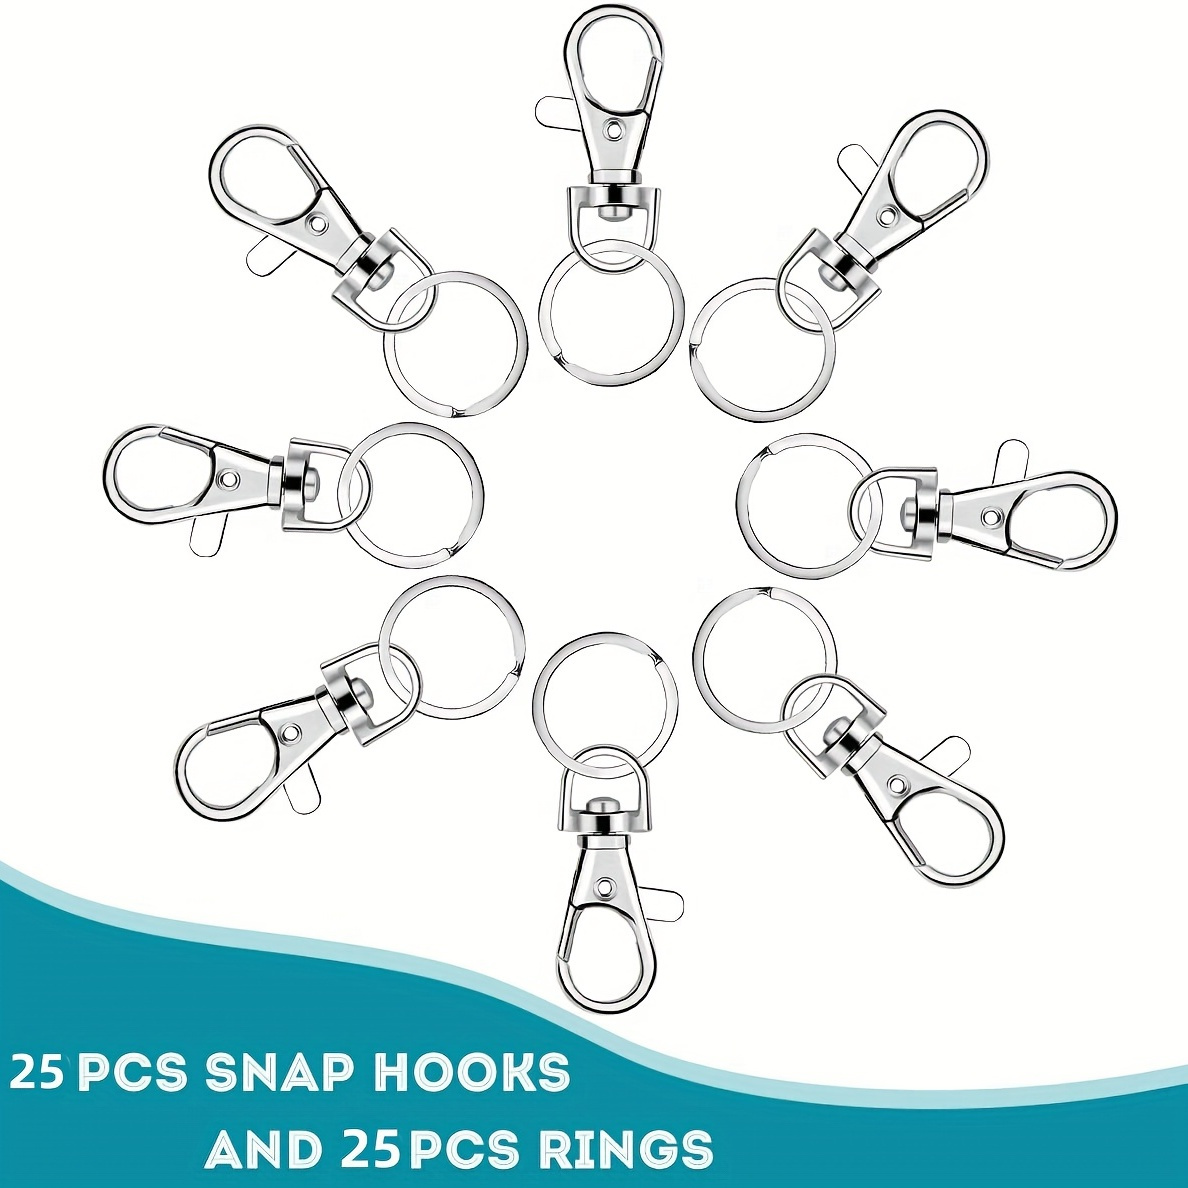 

50pcs Key Chain Hooks With Key Rings, Key Chain Clip Hooks With Rings, For Diy Process Of Hanging Rope Jewelry (25 Metal Lobster Claw Rings+25 Separate Key Rings)